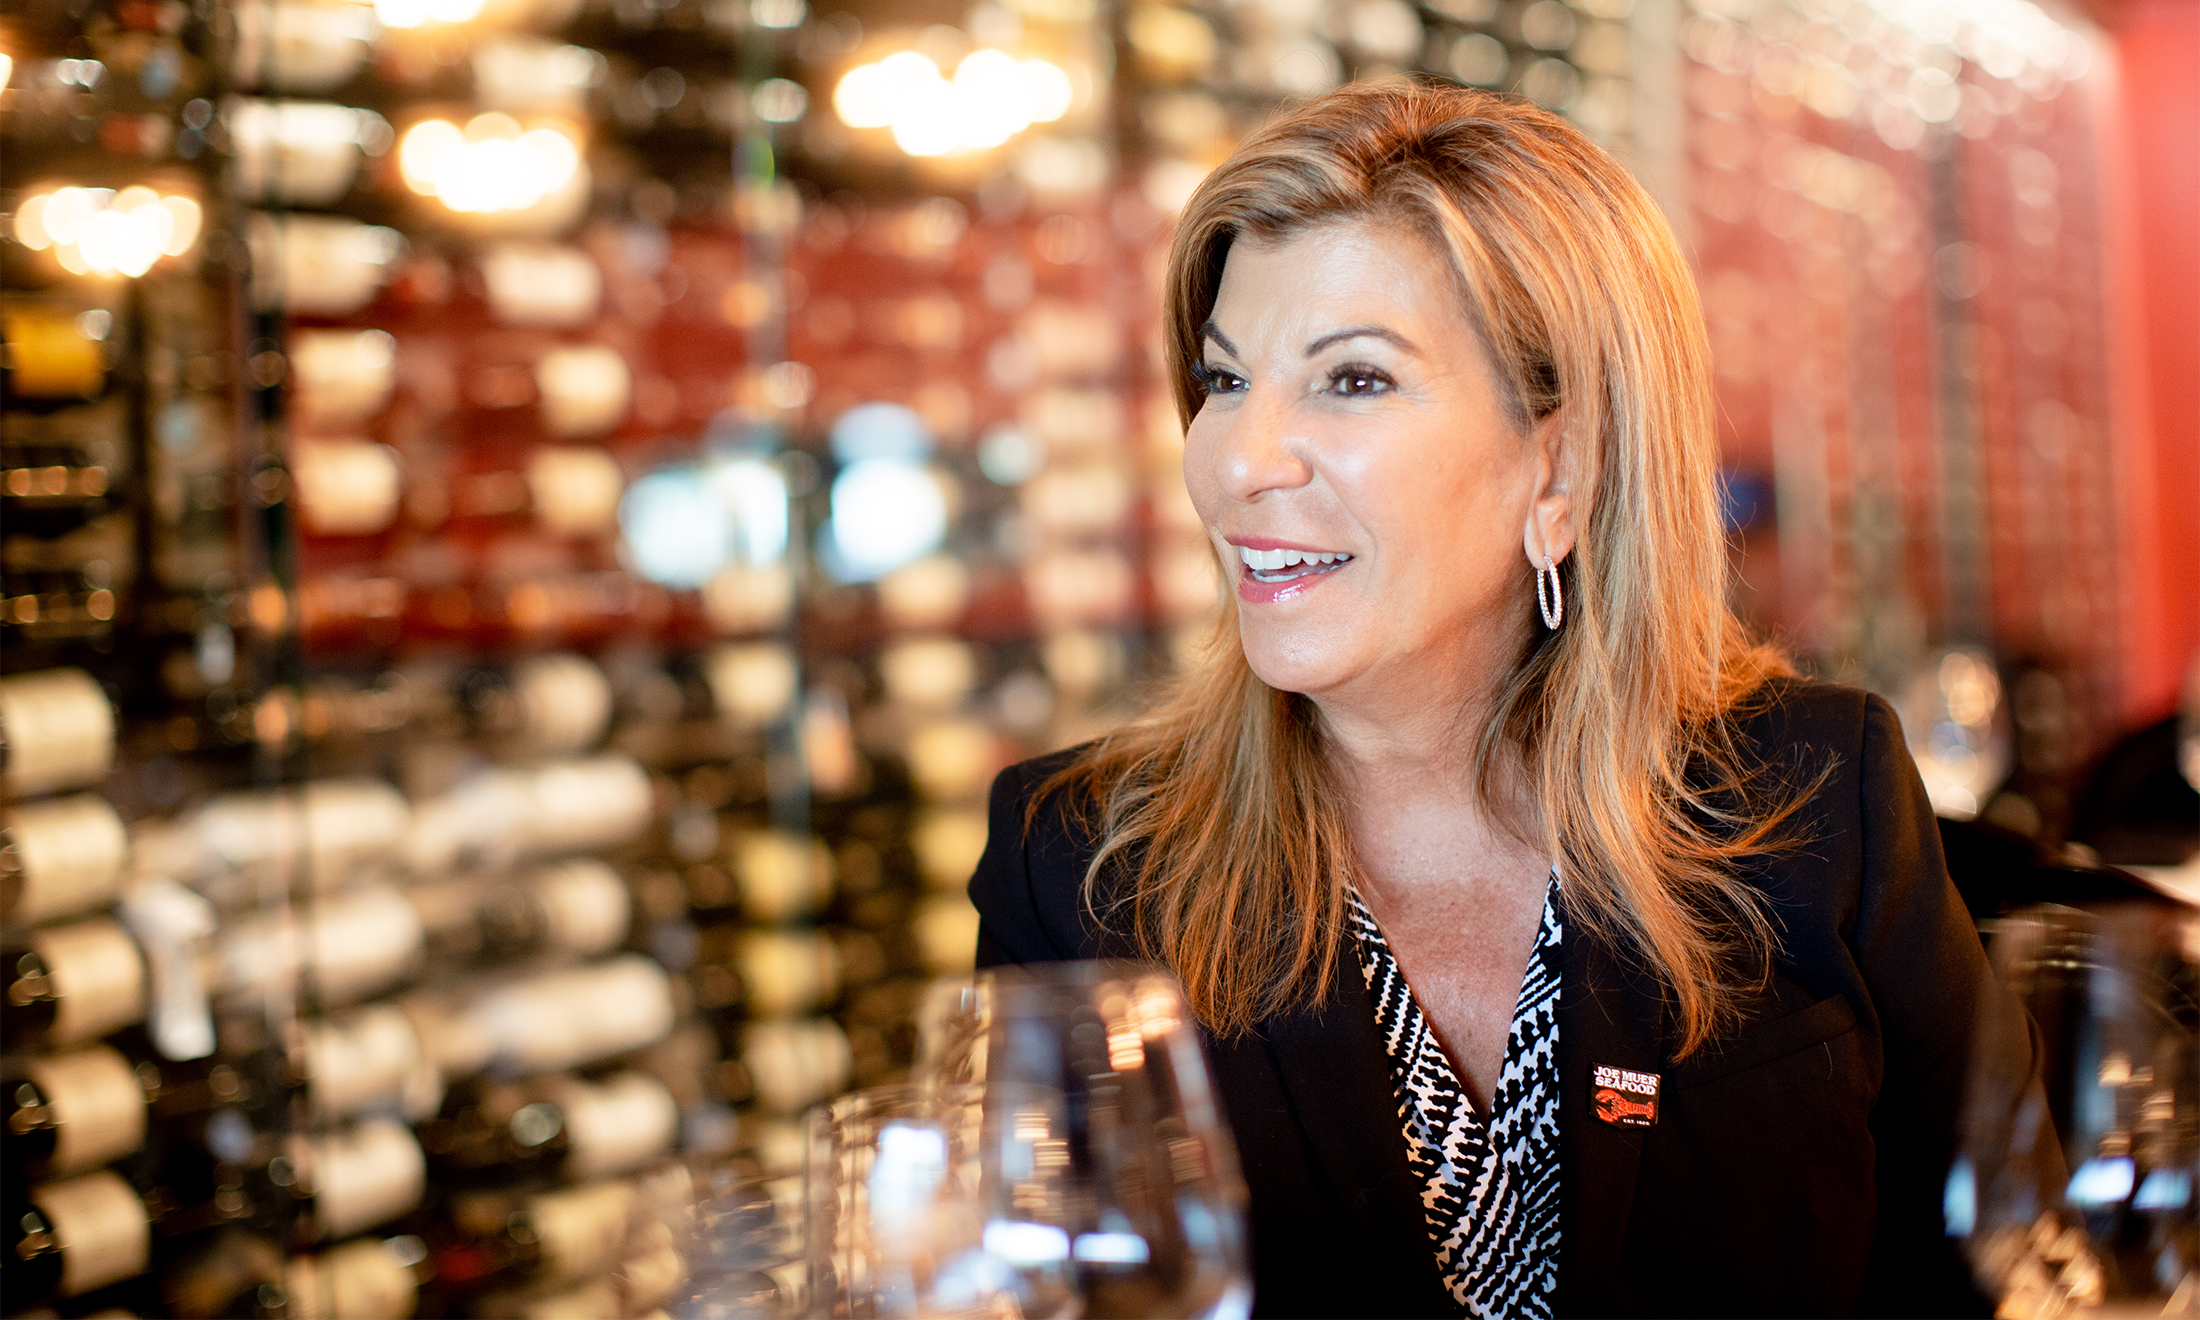 OU alumna Rosalie Vicari shares her journey from educator to COO of state’s largest independent restaurant group